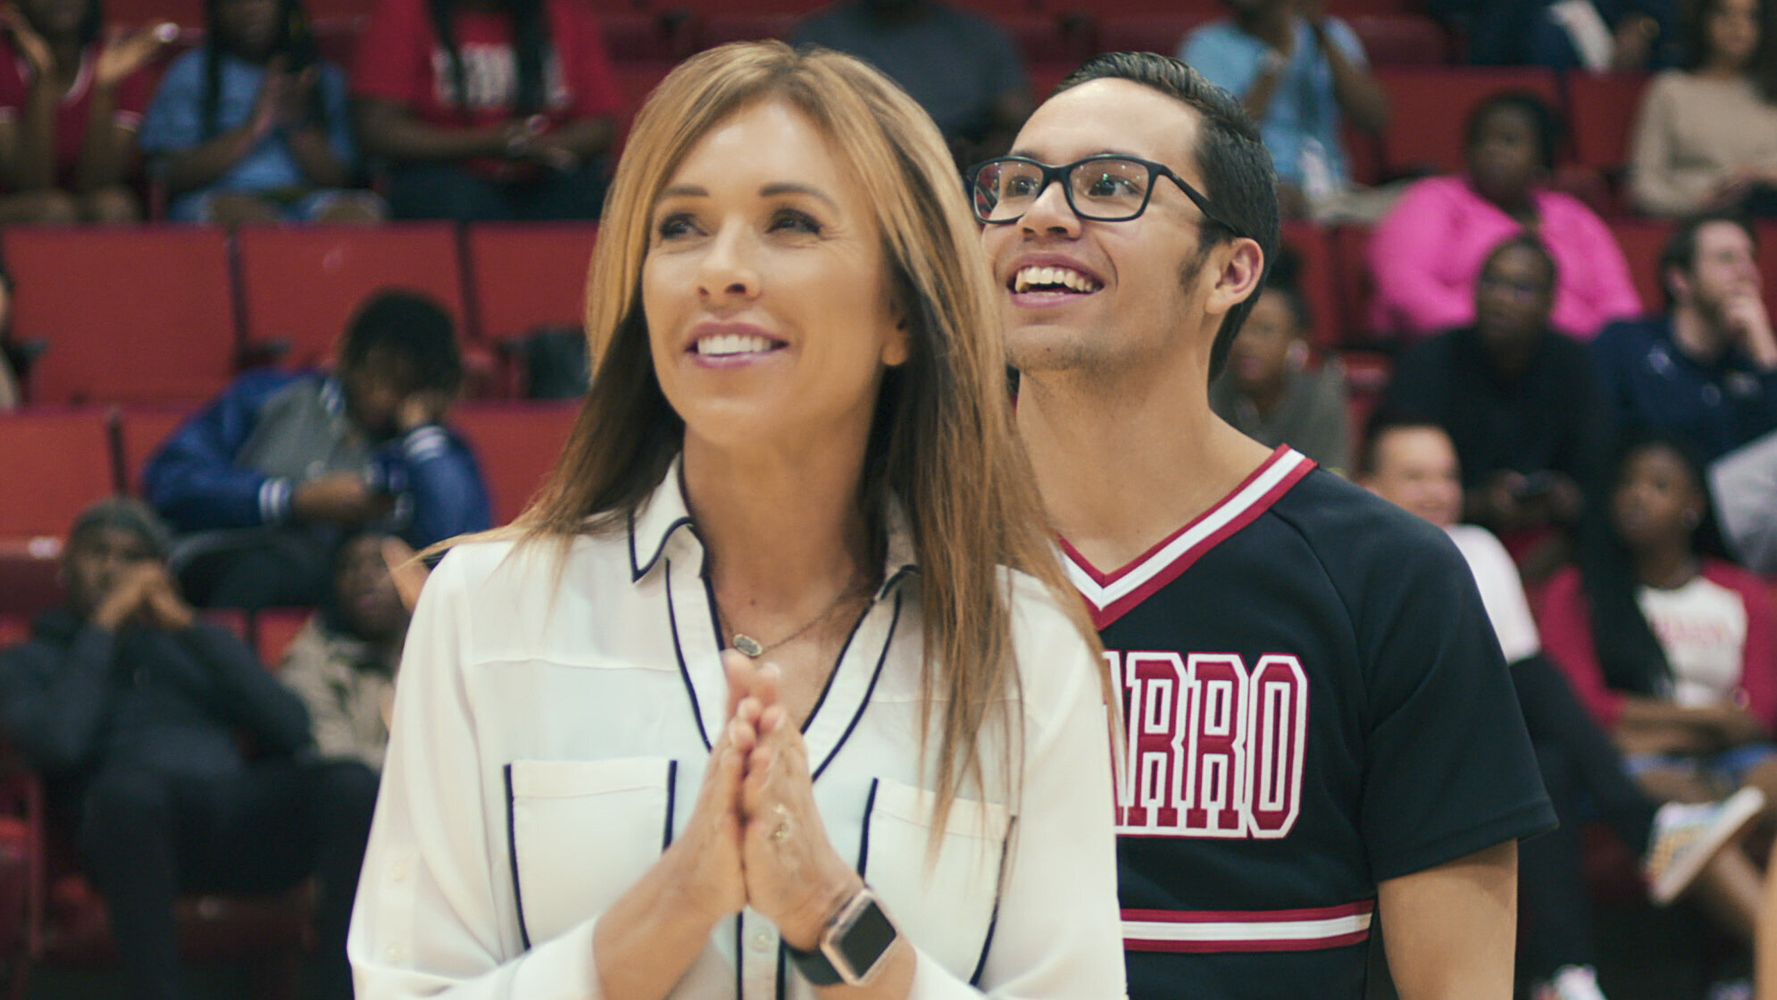 5 Other Things To Watch On Netflix If You Like 'Cheer' .